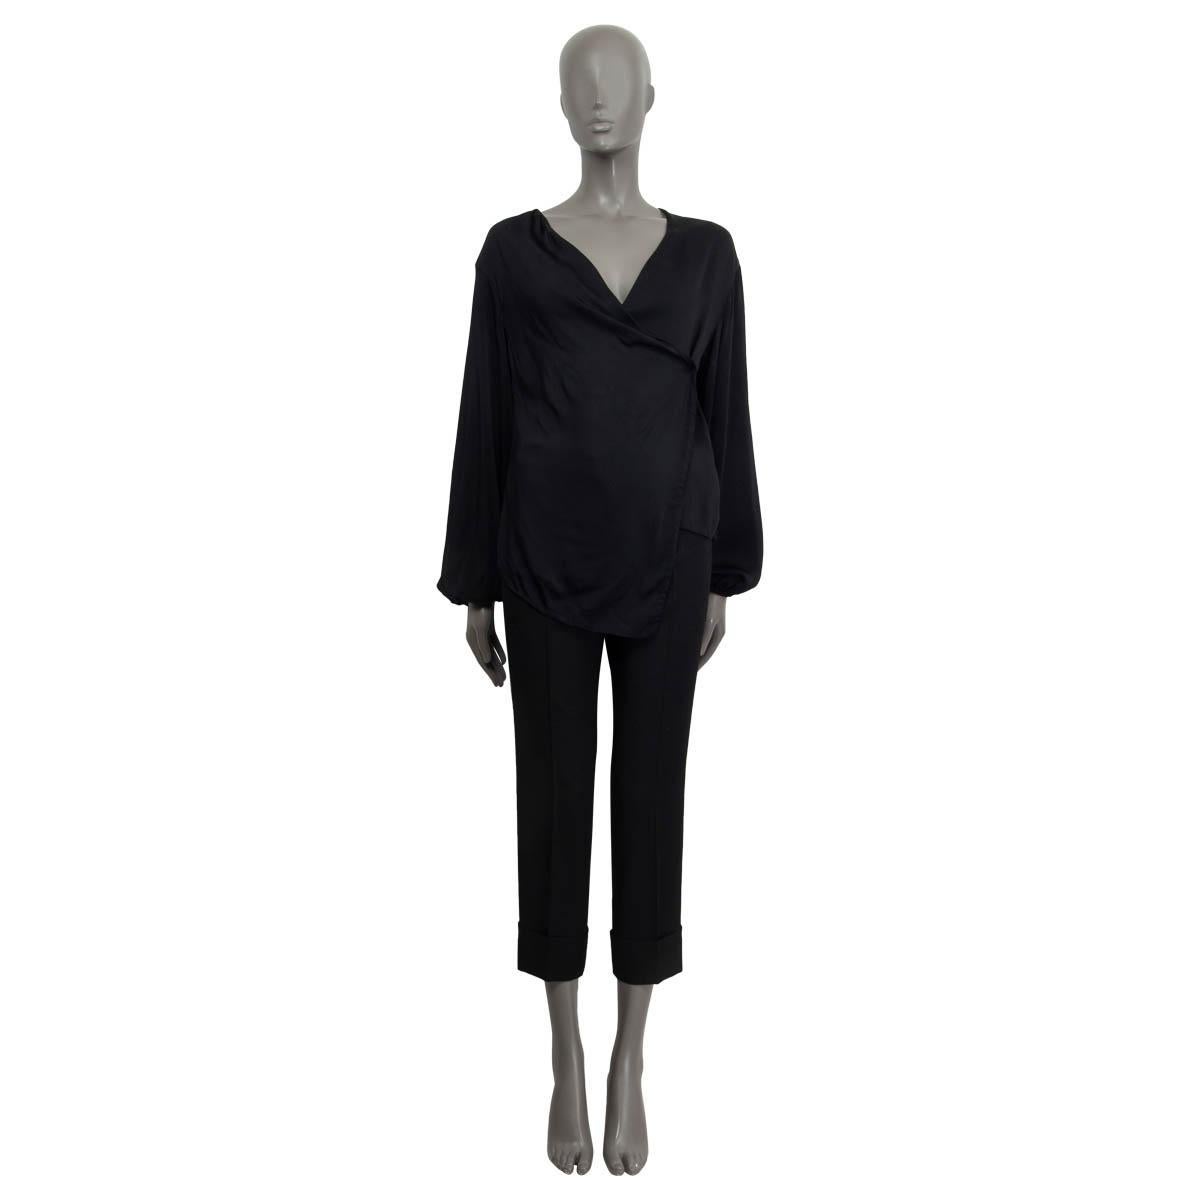 100% authentic Victoria Beckham long sleeve shirt in black polyester (100%). Features a deep v-neck and a diagonal cut. Opens with two concealed buttons on the front. Lined in black silk (100%). Has been worn and is in excellent